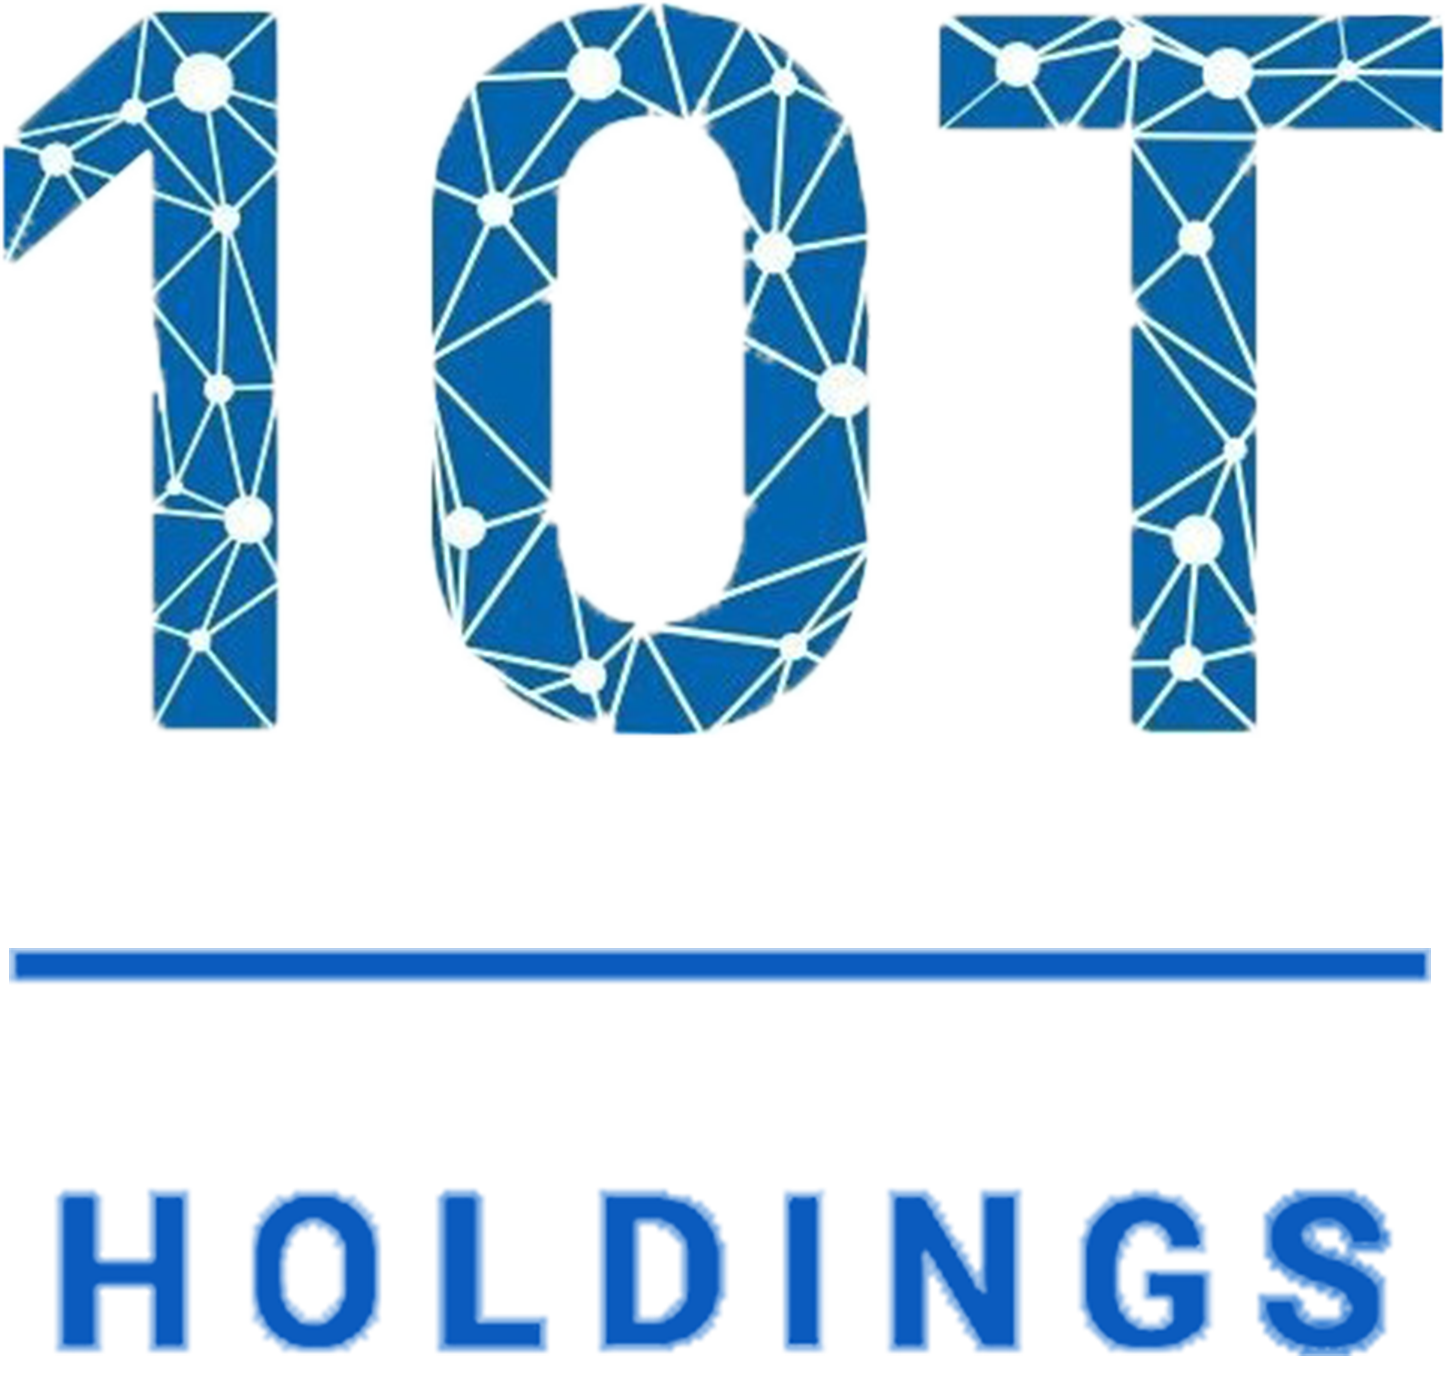 10T Holdings